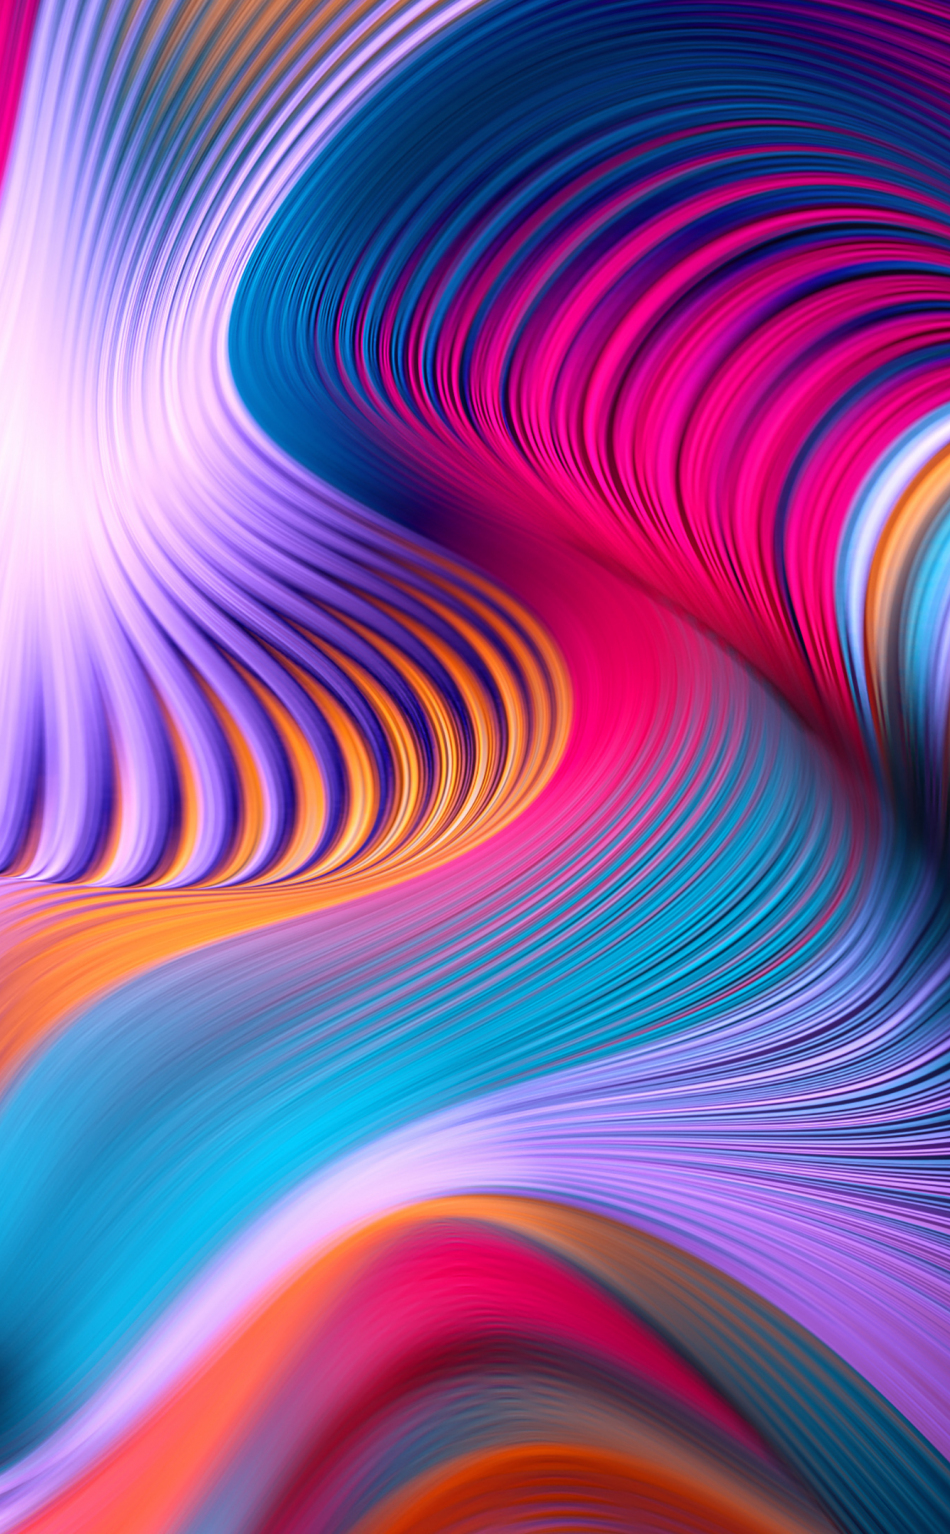 Download wallpaper 950x1534 wavy stripes, artwork, abstraction ...